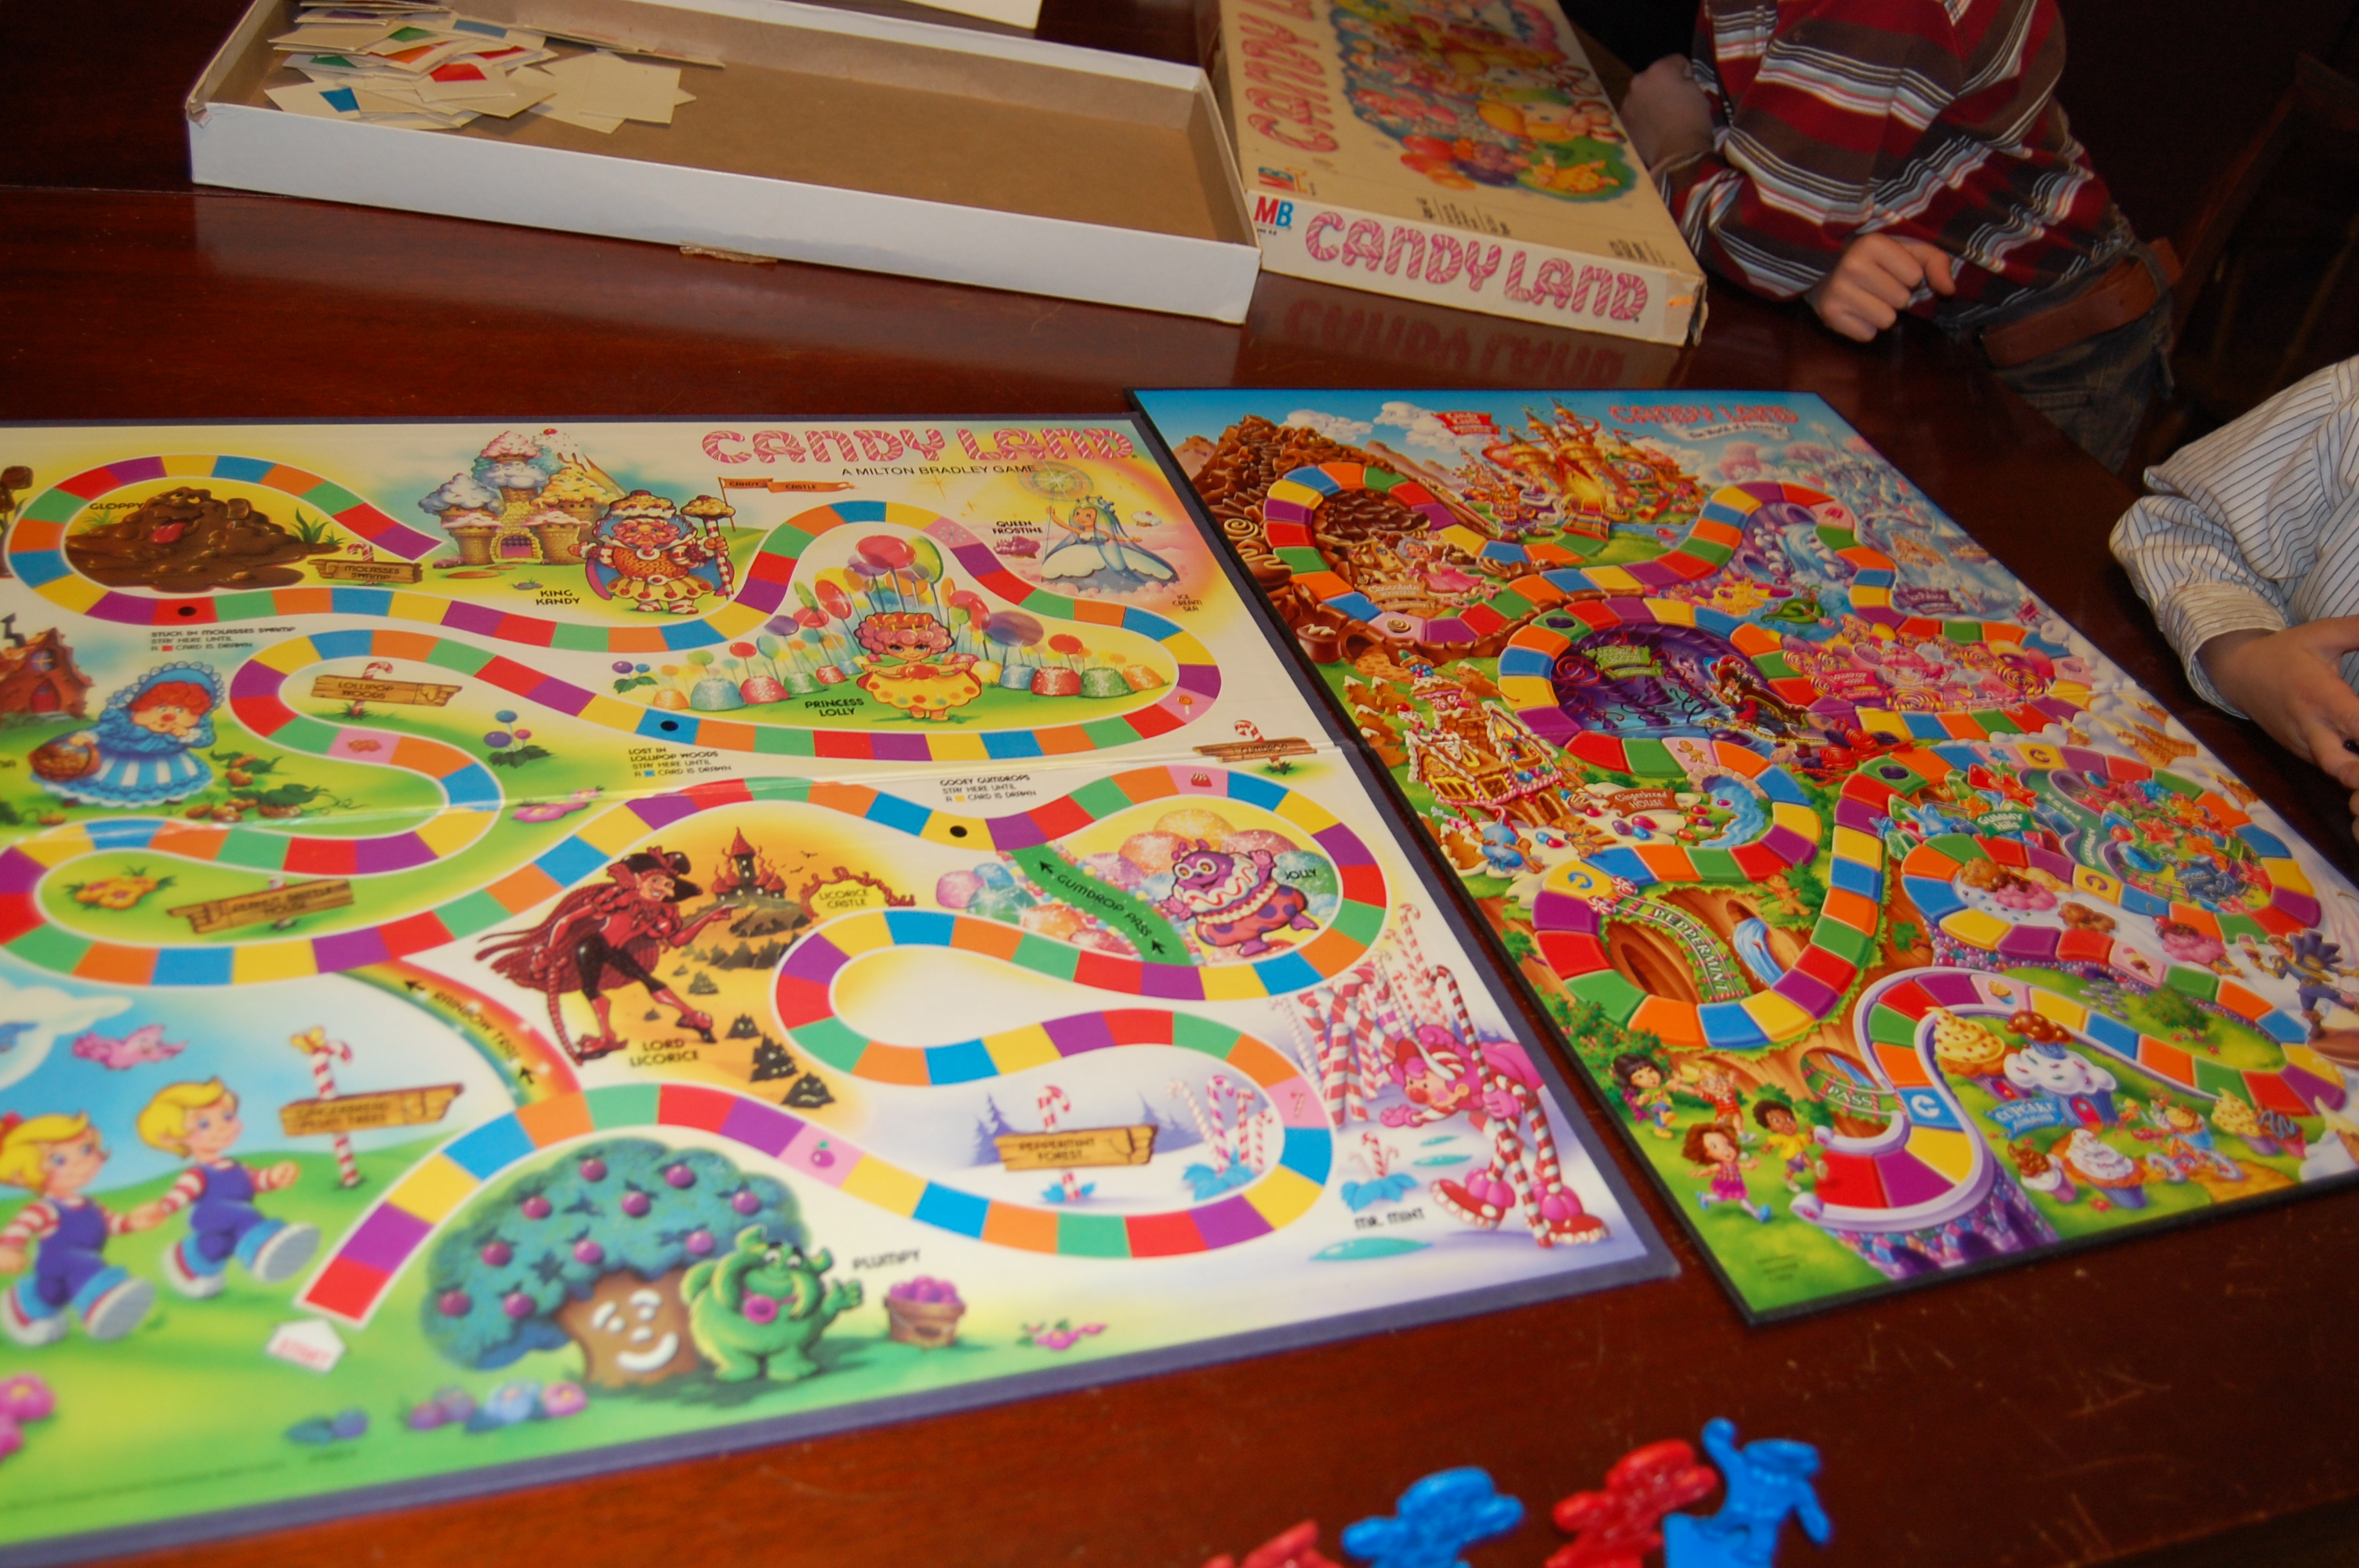 candy land board game cahracters